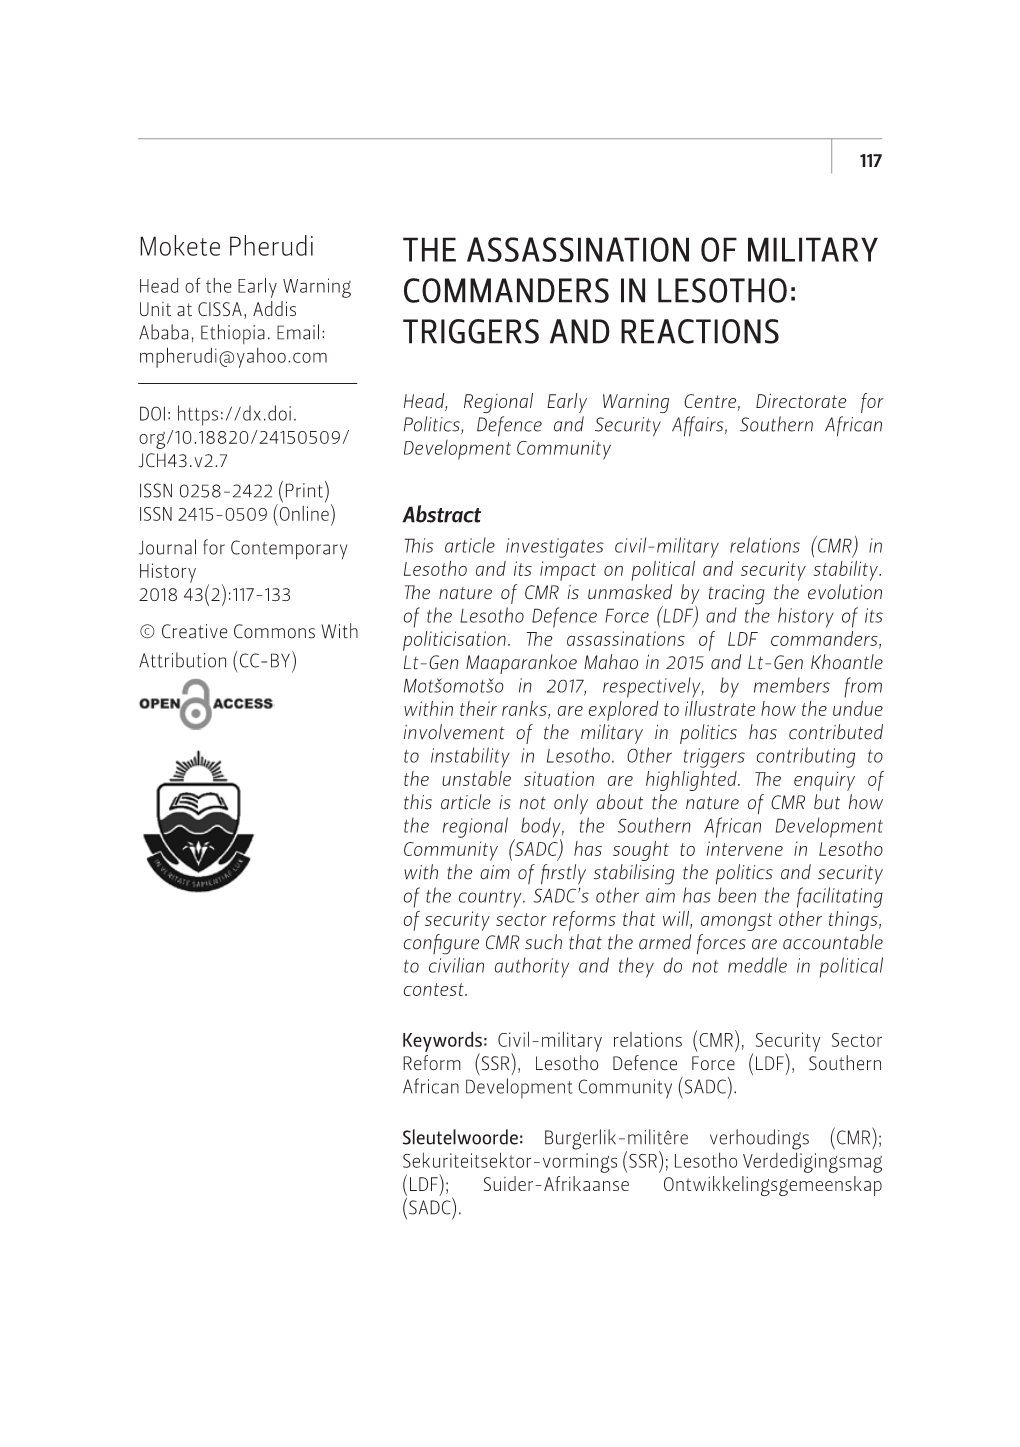 The Assassination of Military Commanders In